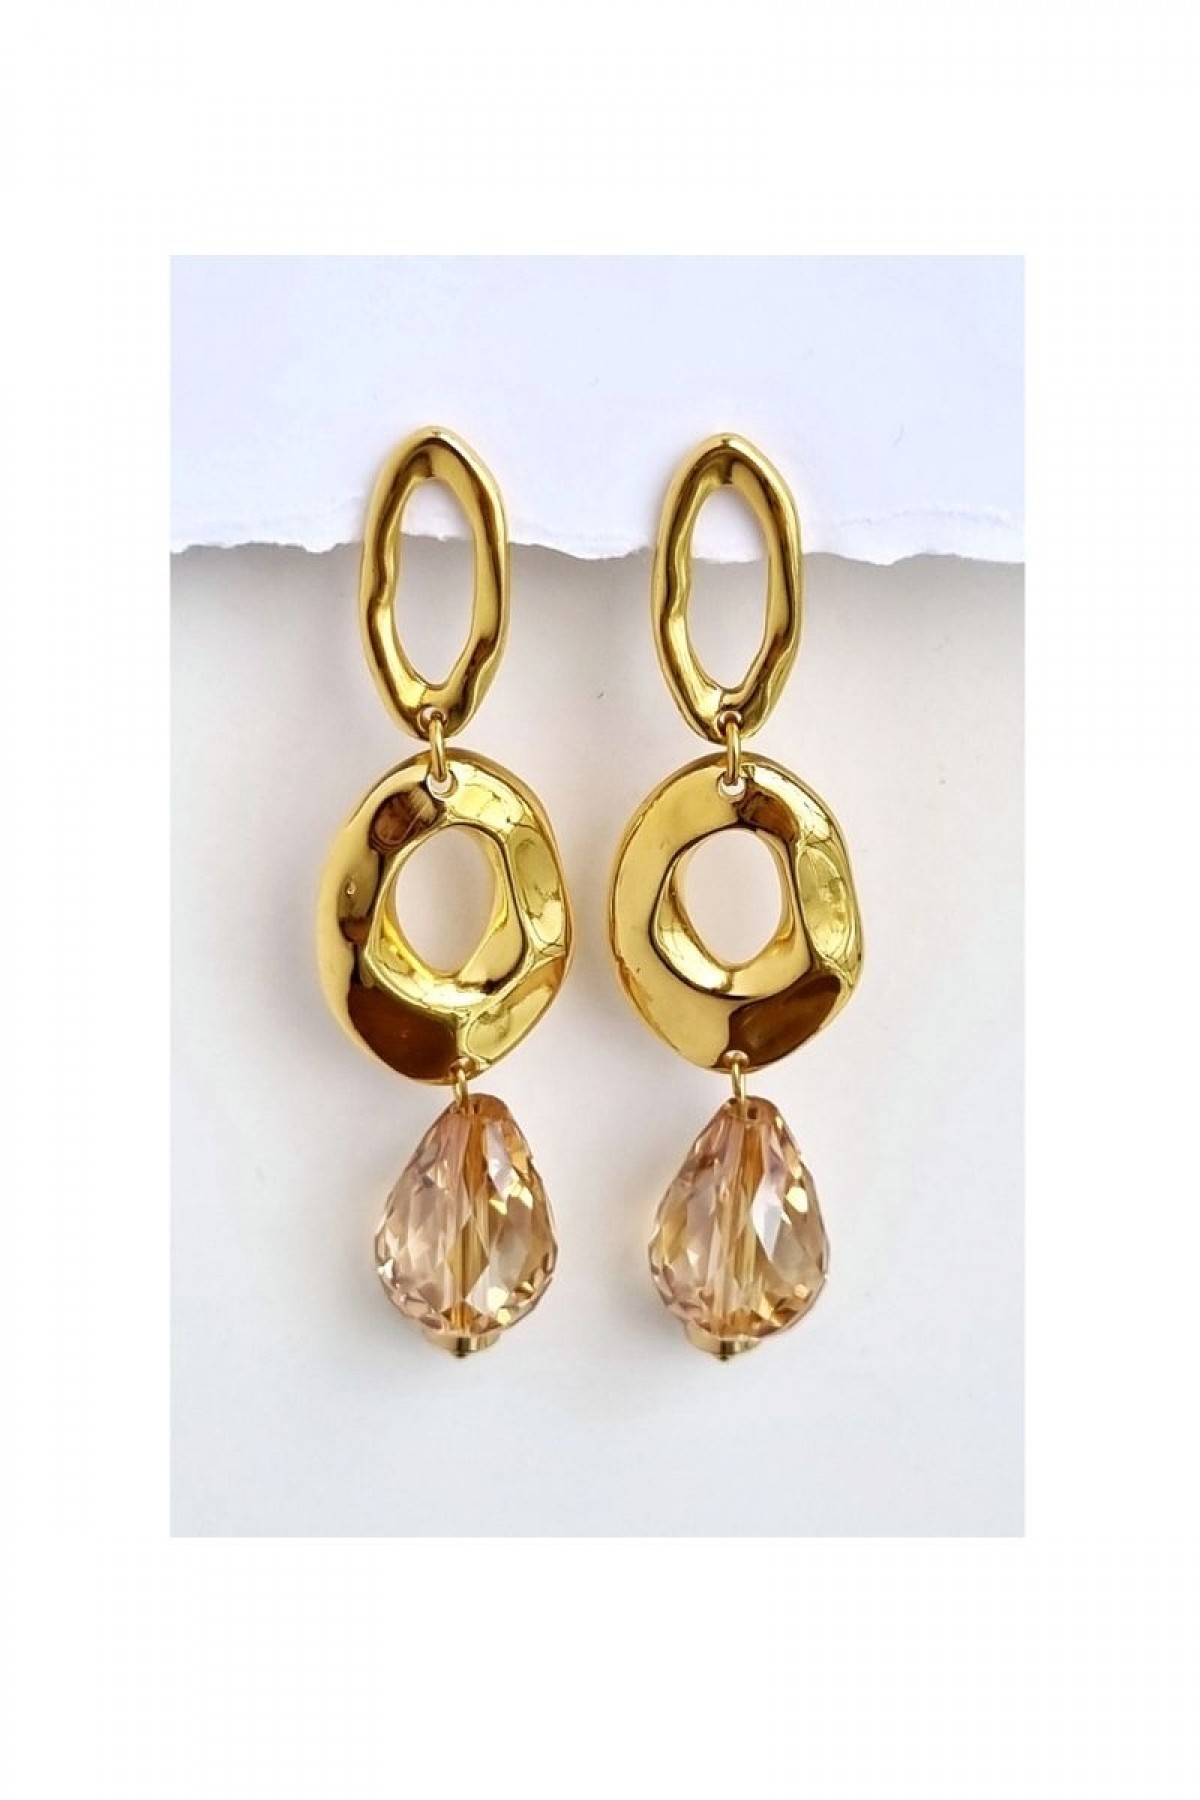 GOLD PLATED EARRINGS WITH CRYSTALS by Eve Kay